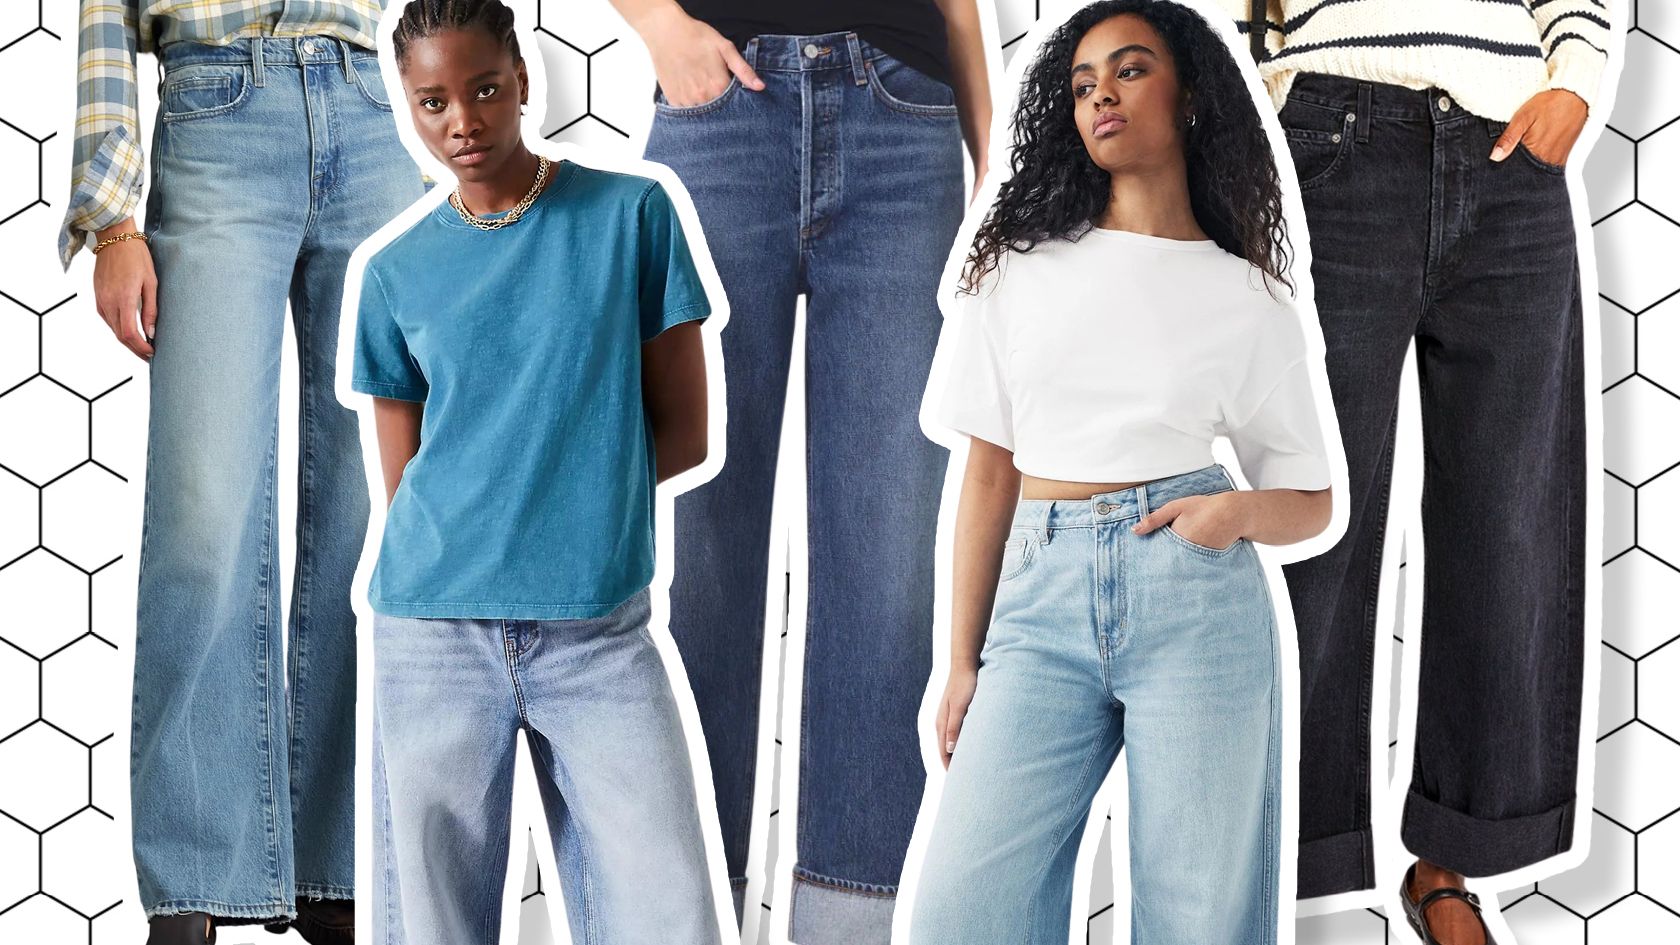 Super high-waisted jeans are the jean style of the moment